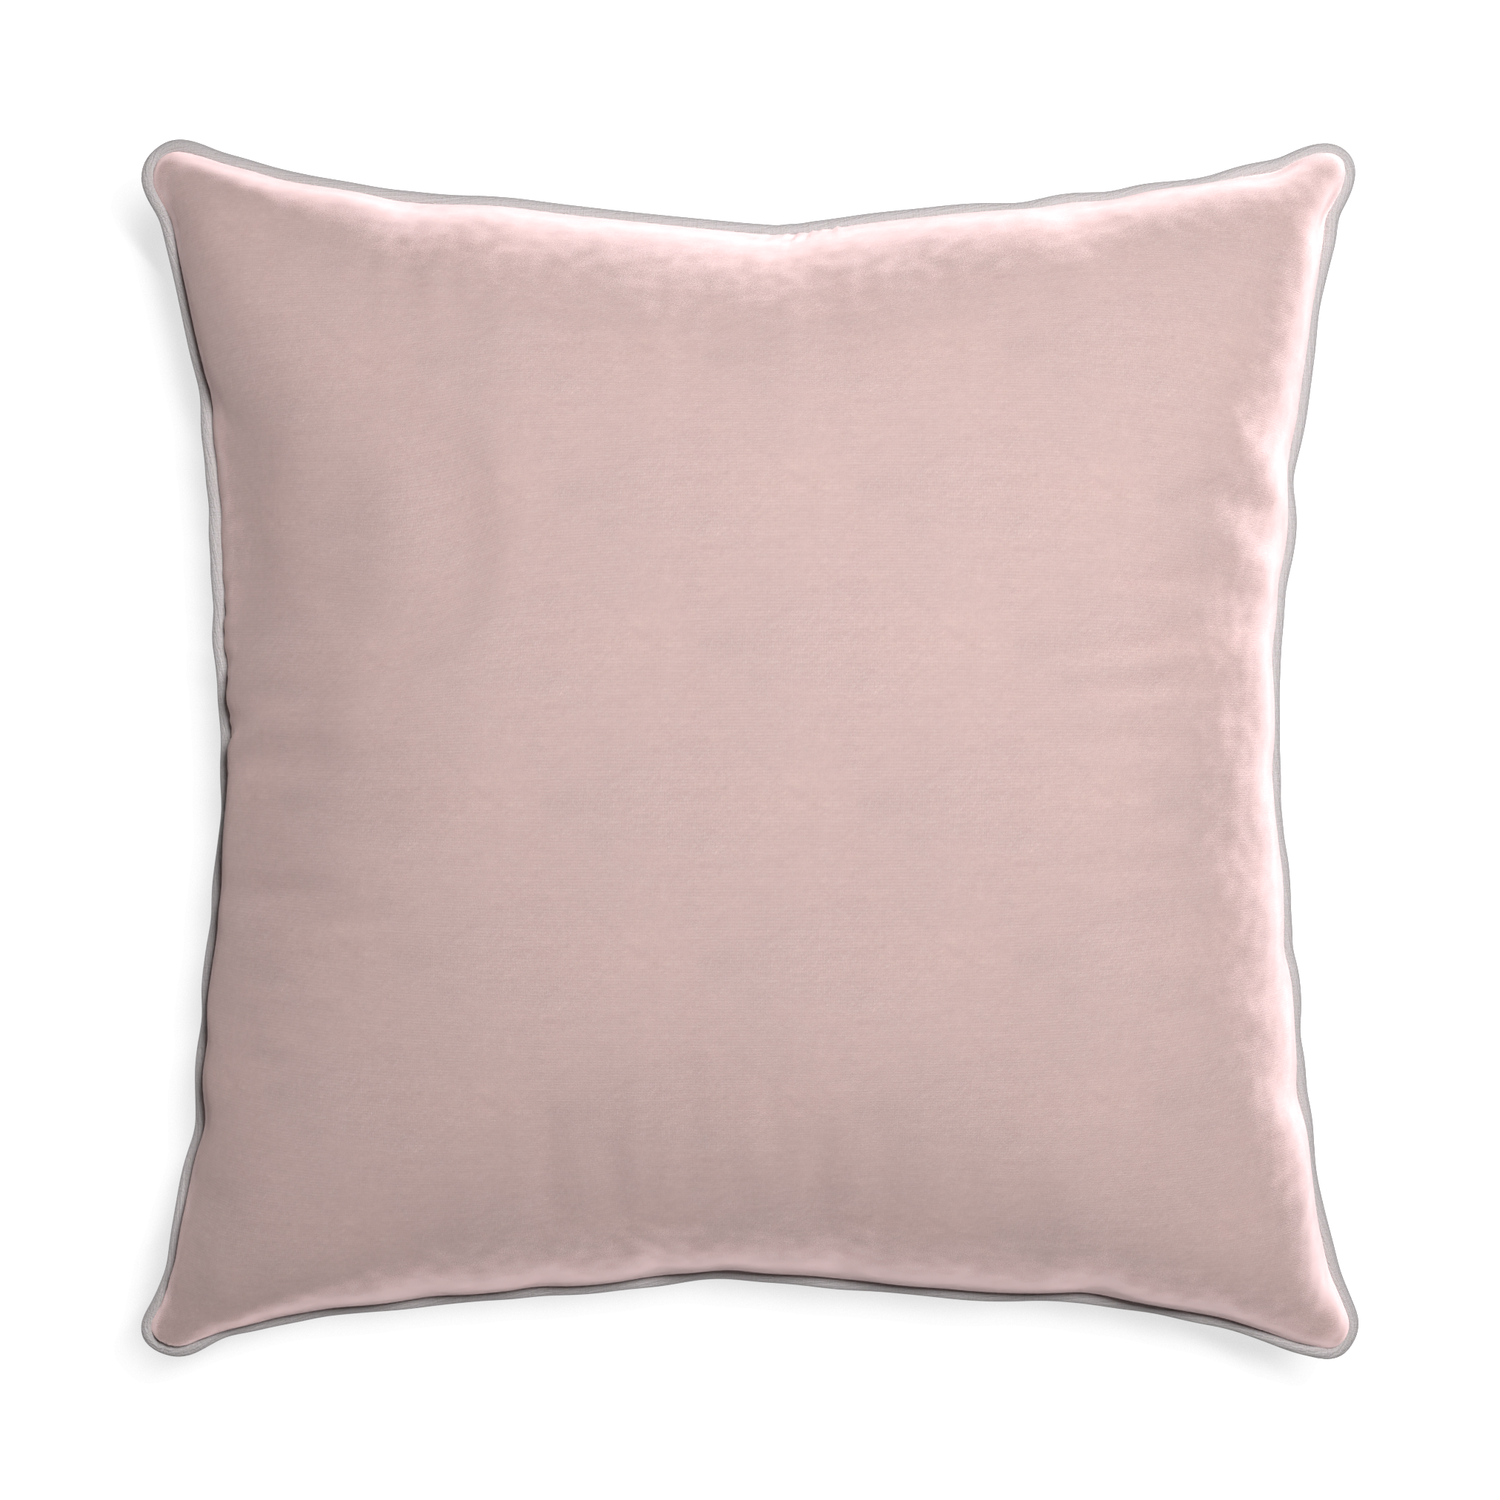 square light pink velvet pillow with light grey piping 